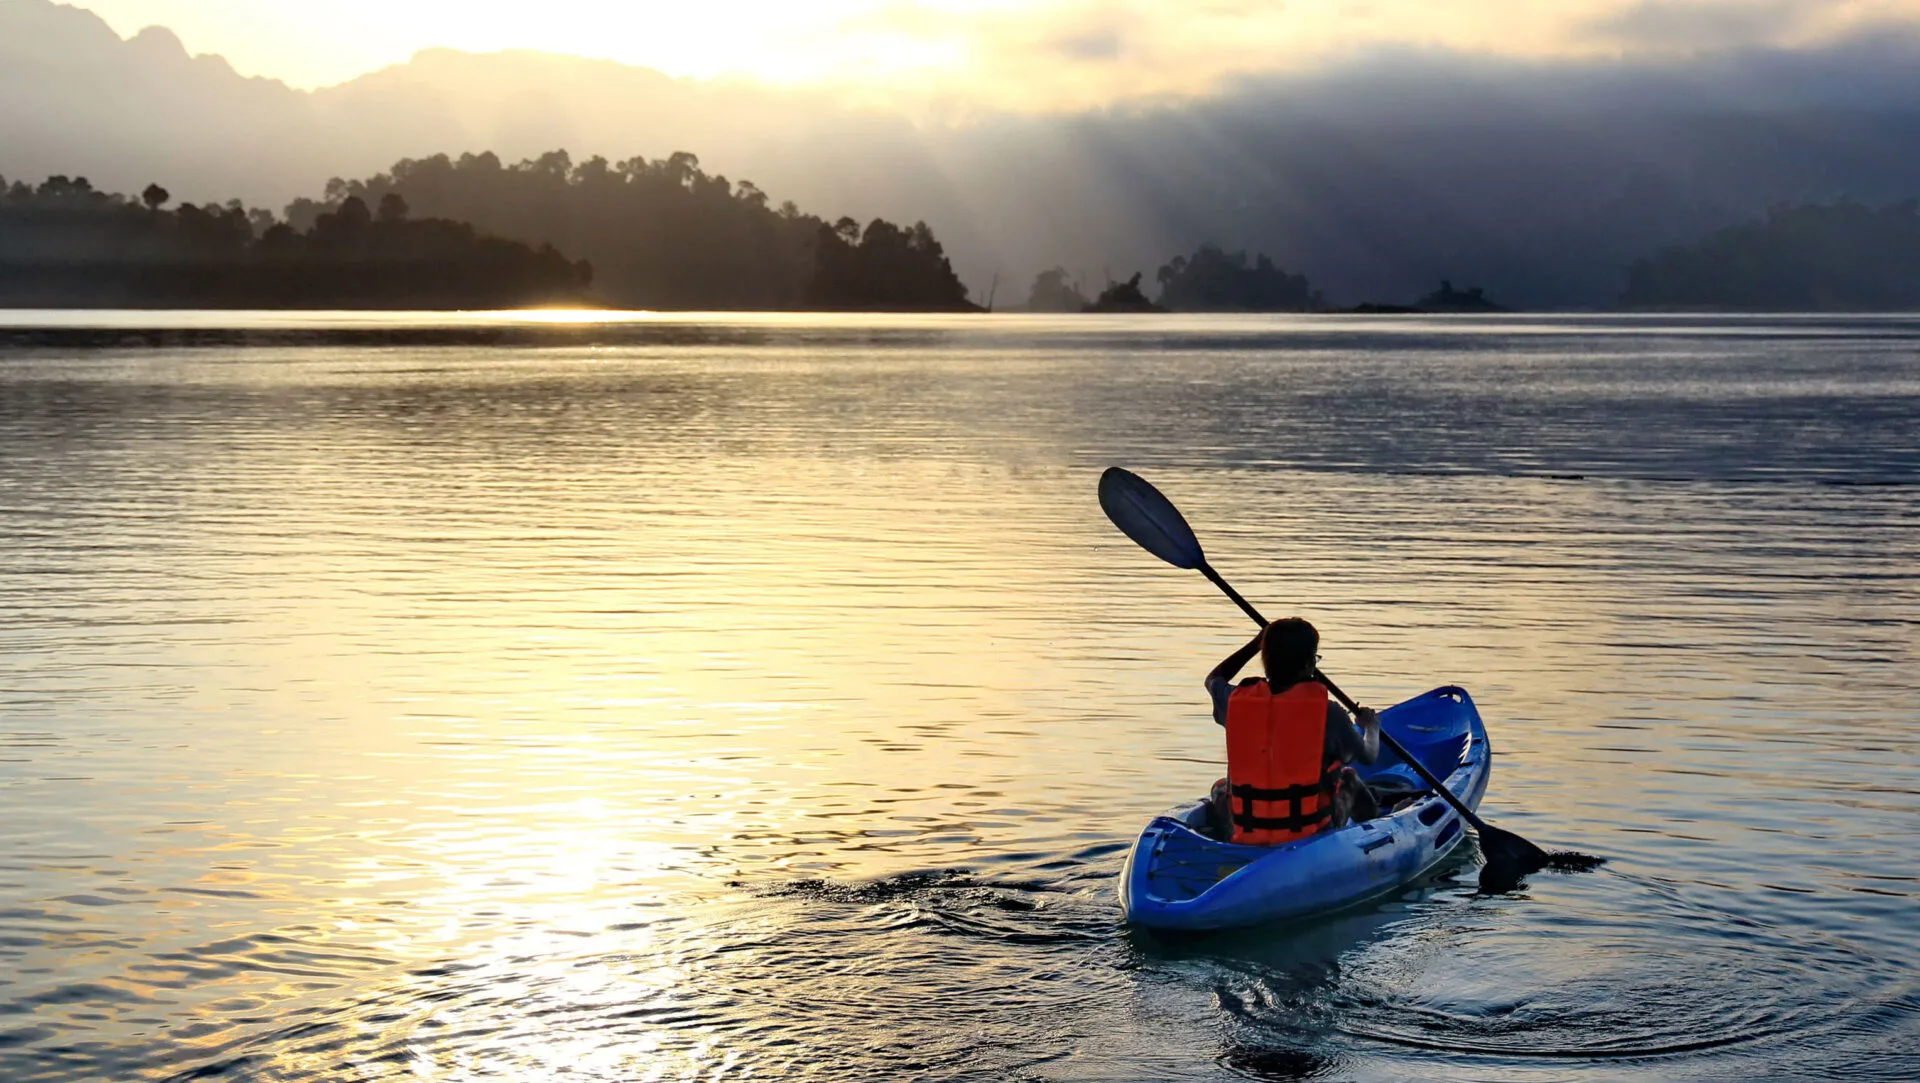 image of person kayaking, a connecticut outdoor activity.